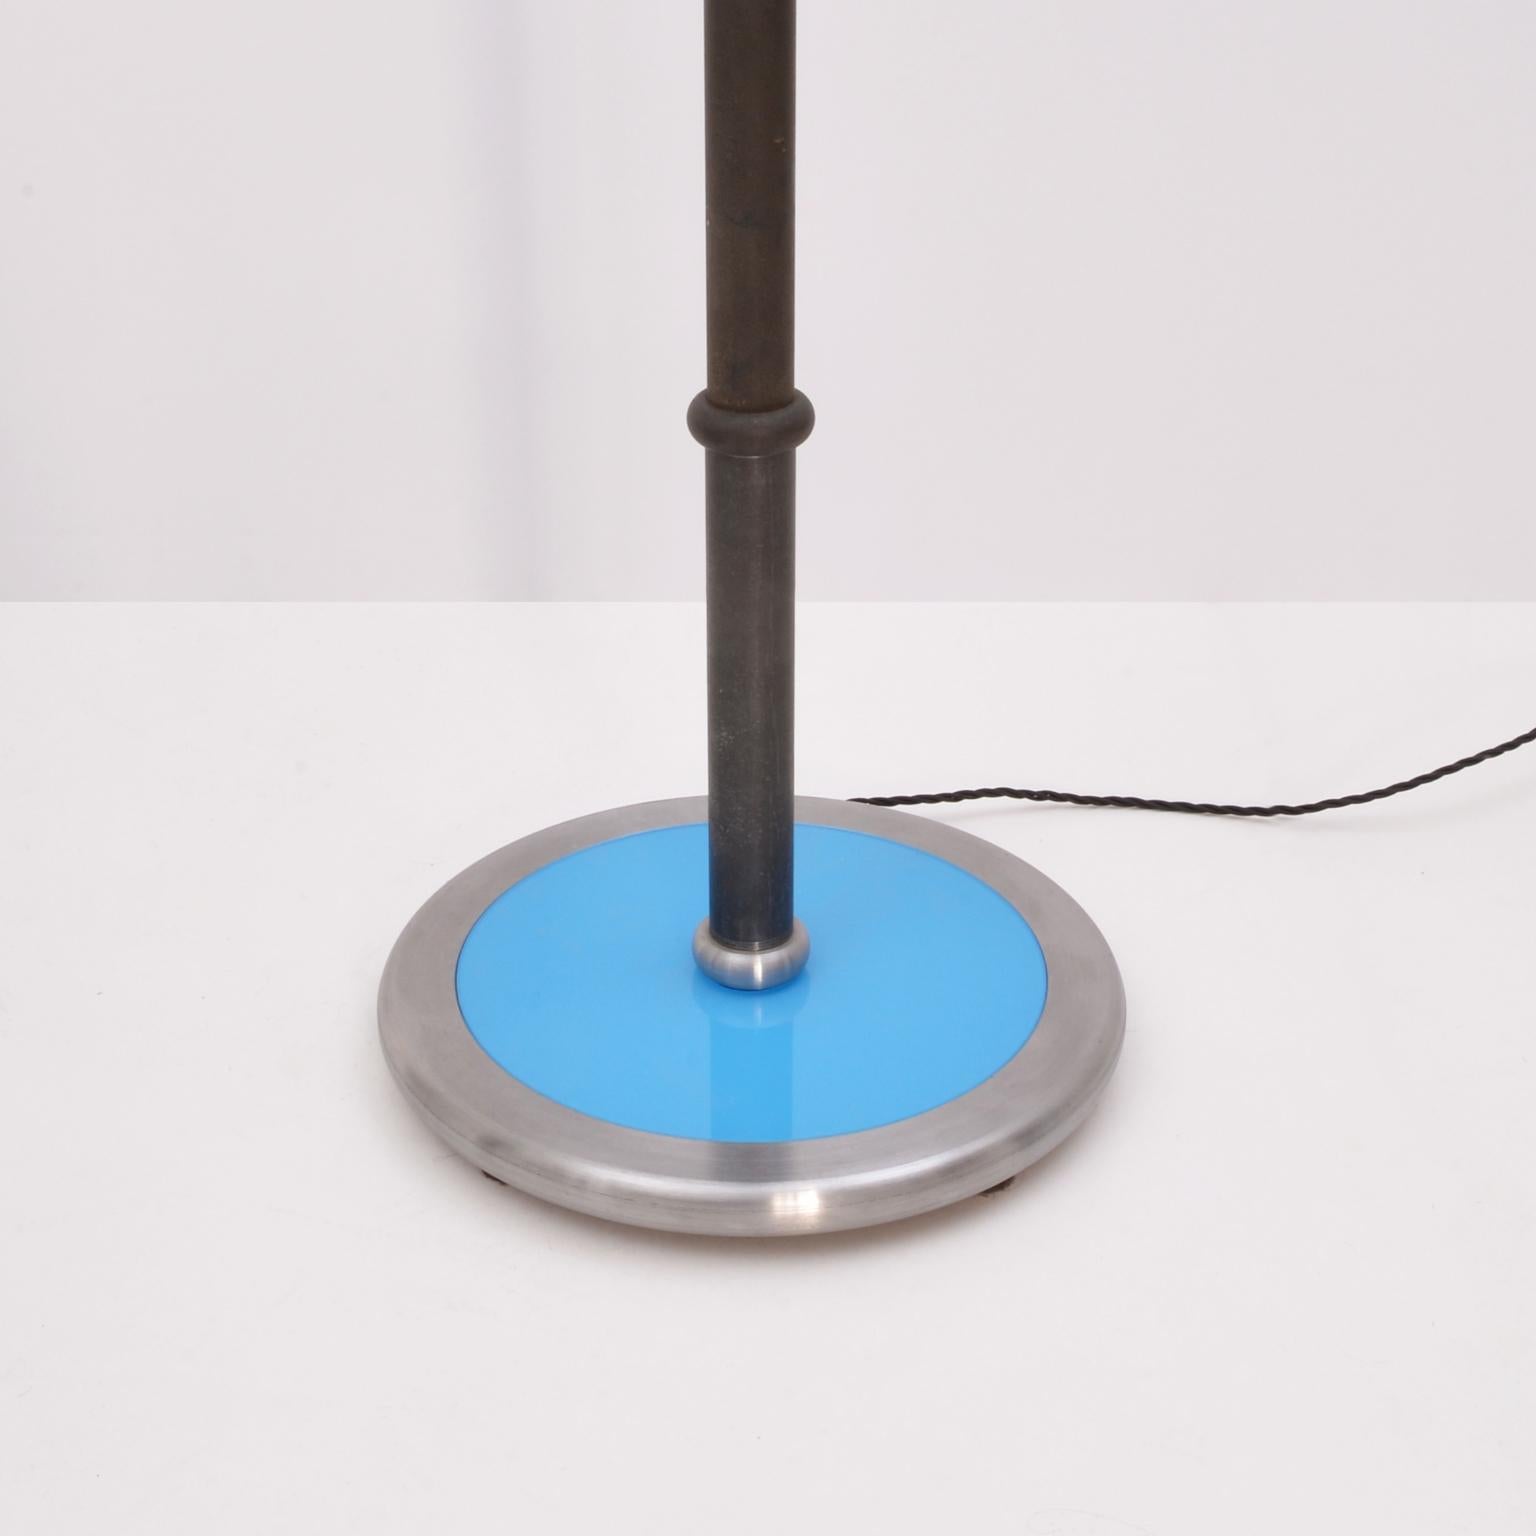 Italian Postmodern Memphis Style Floor Lamp, Burnished Metal and Blue Glass, Italy, 1980 For Sale